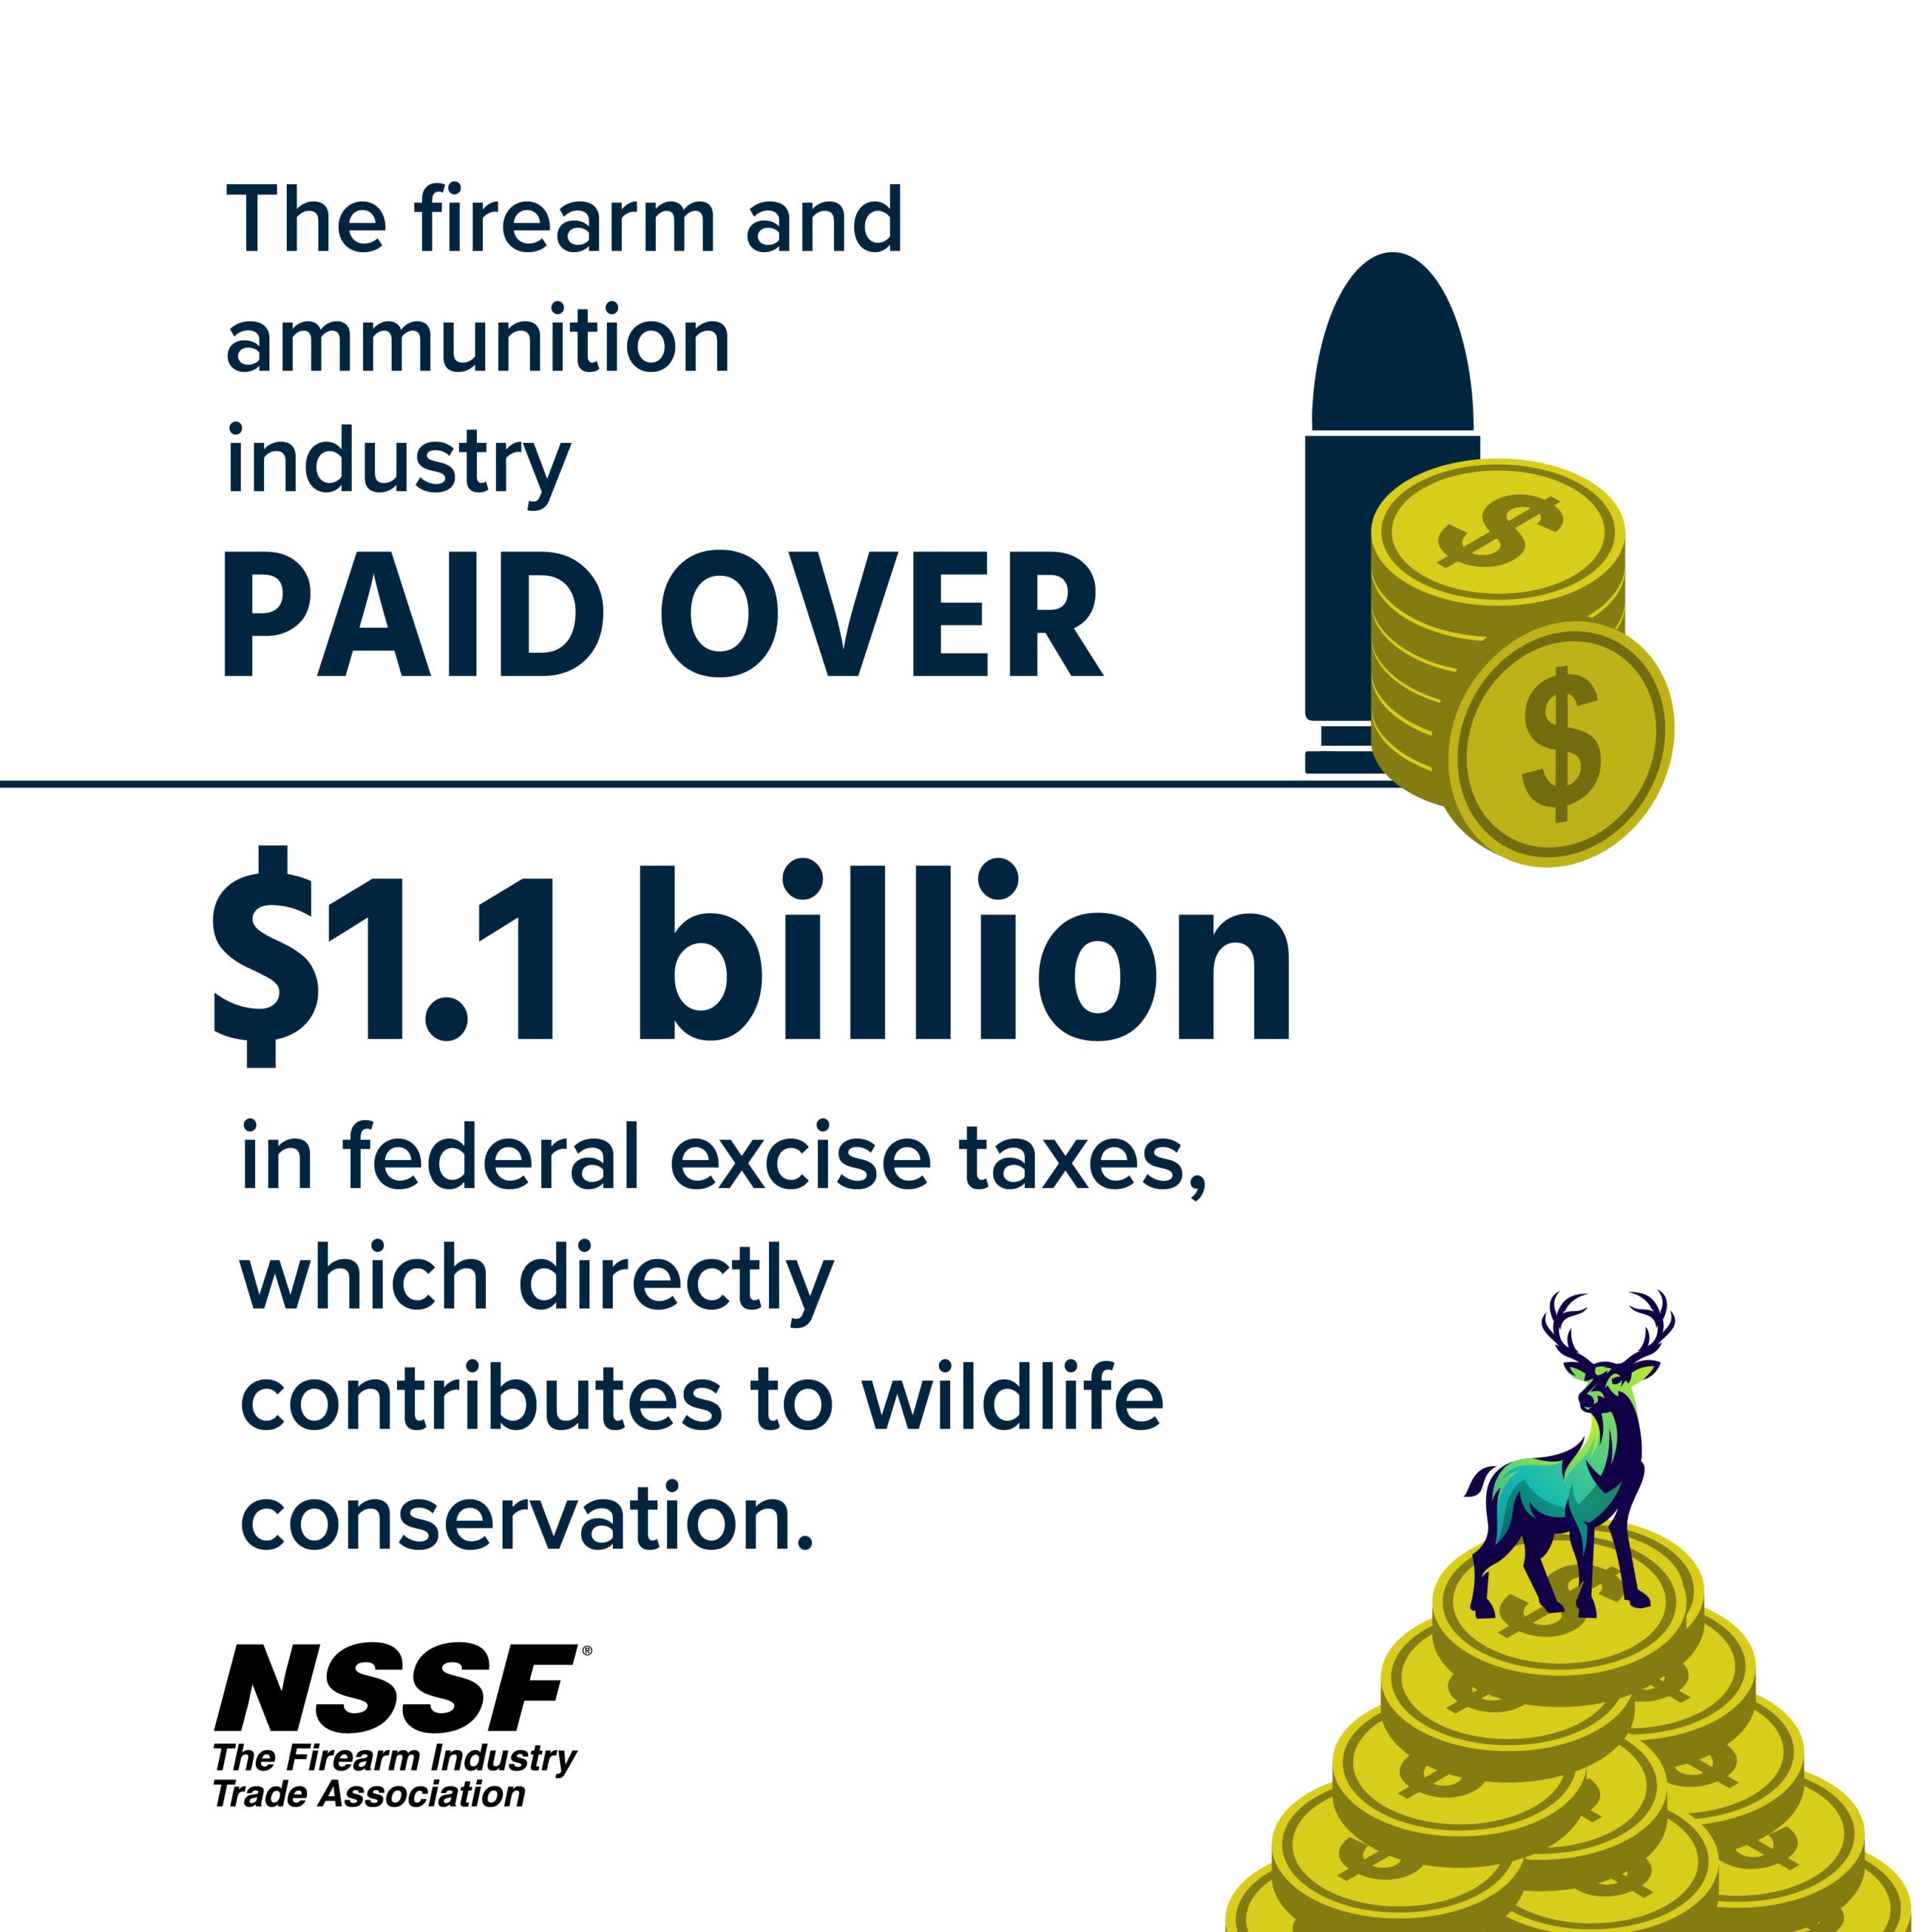 The+firearm+and+ammunition+industry+paid+$1.1+billion+was+paid+in+federal+excise+taxes,+which+directly+contributes+to+wildlife+conservation.